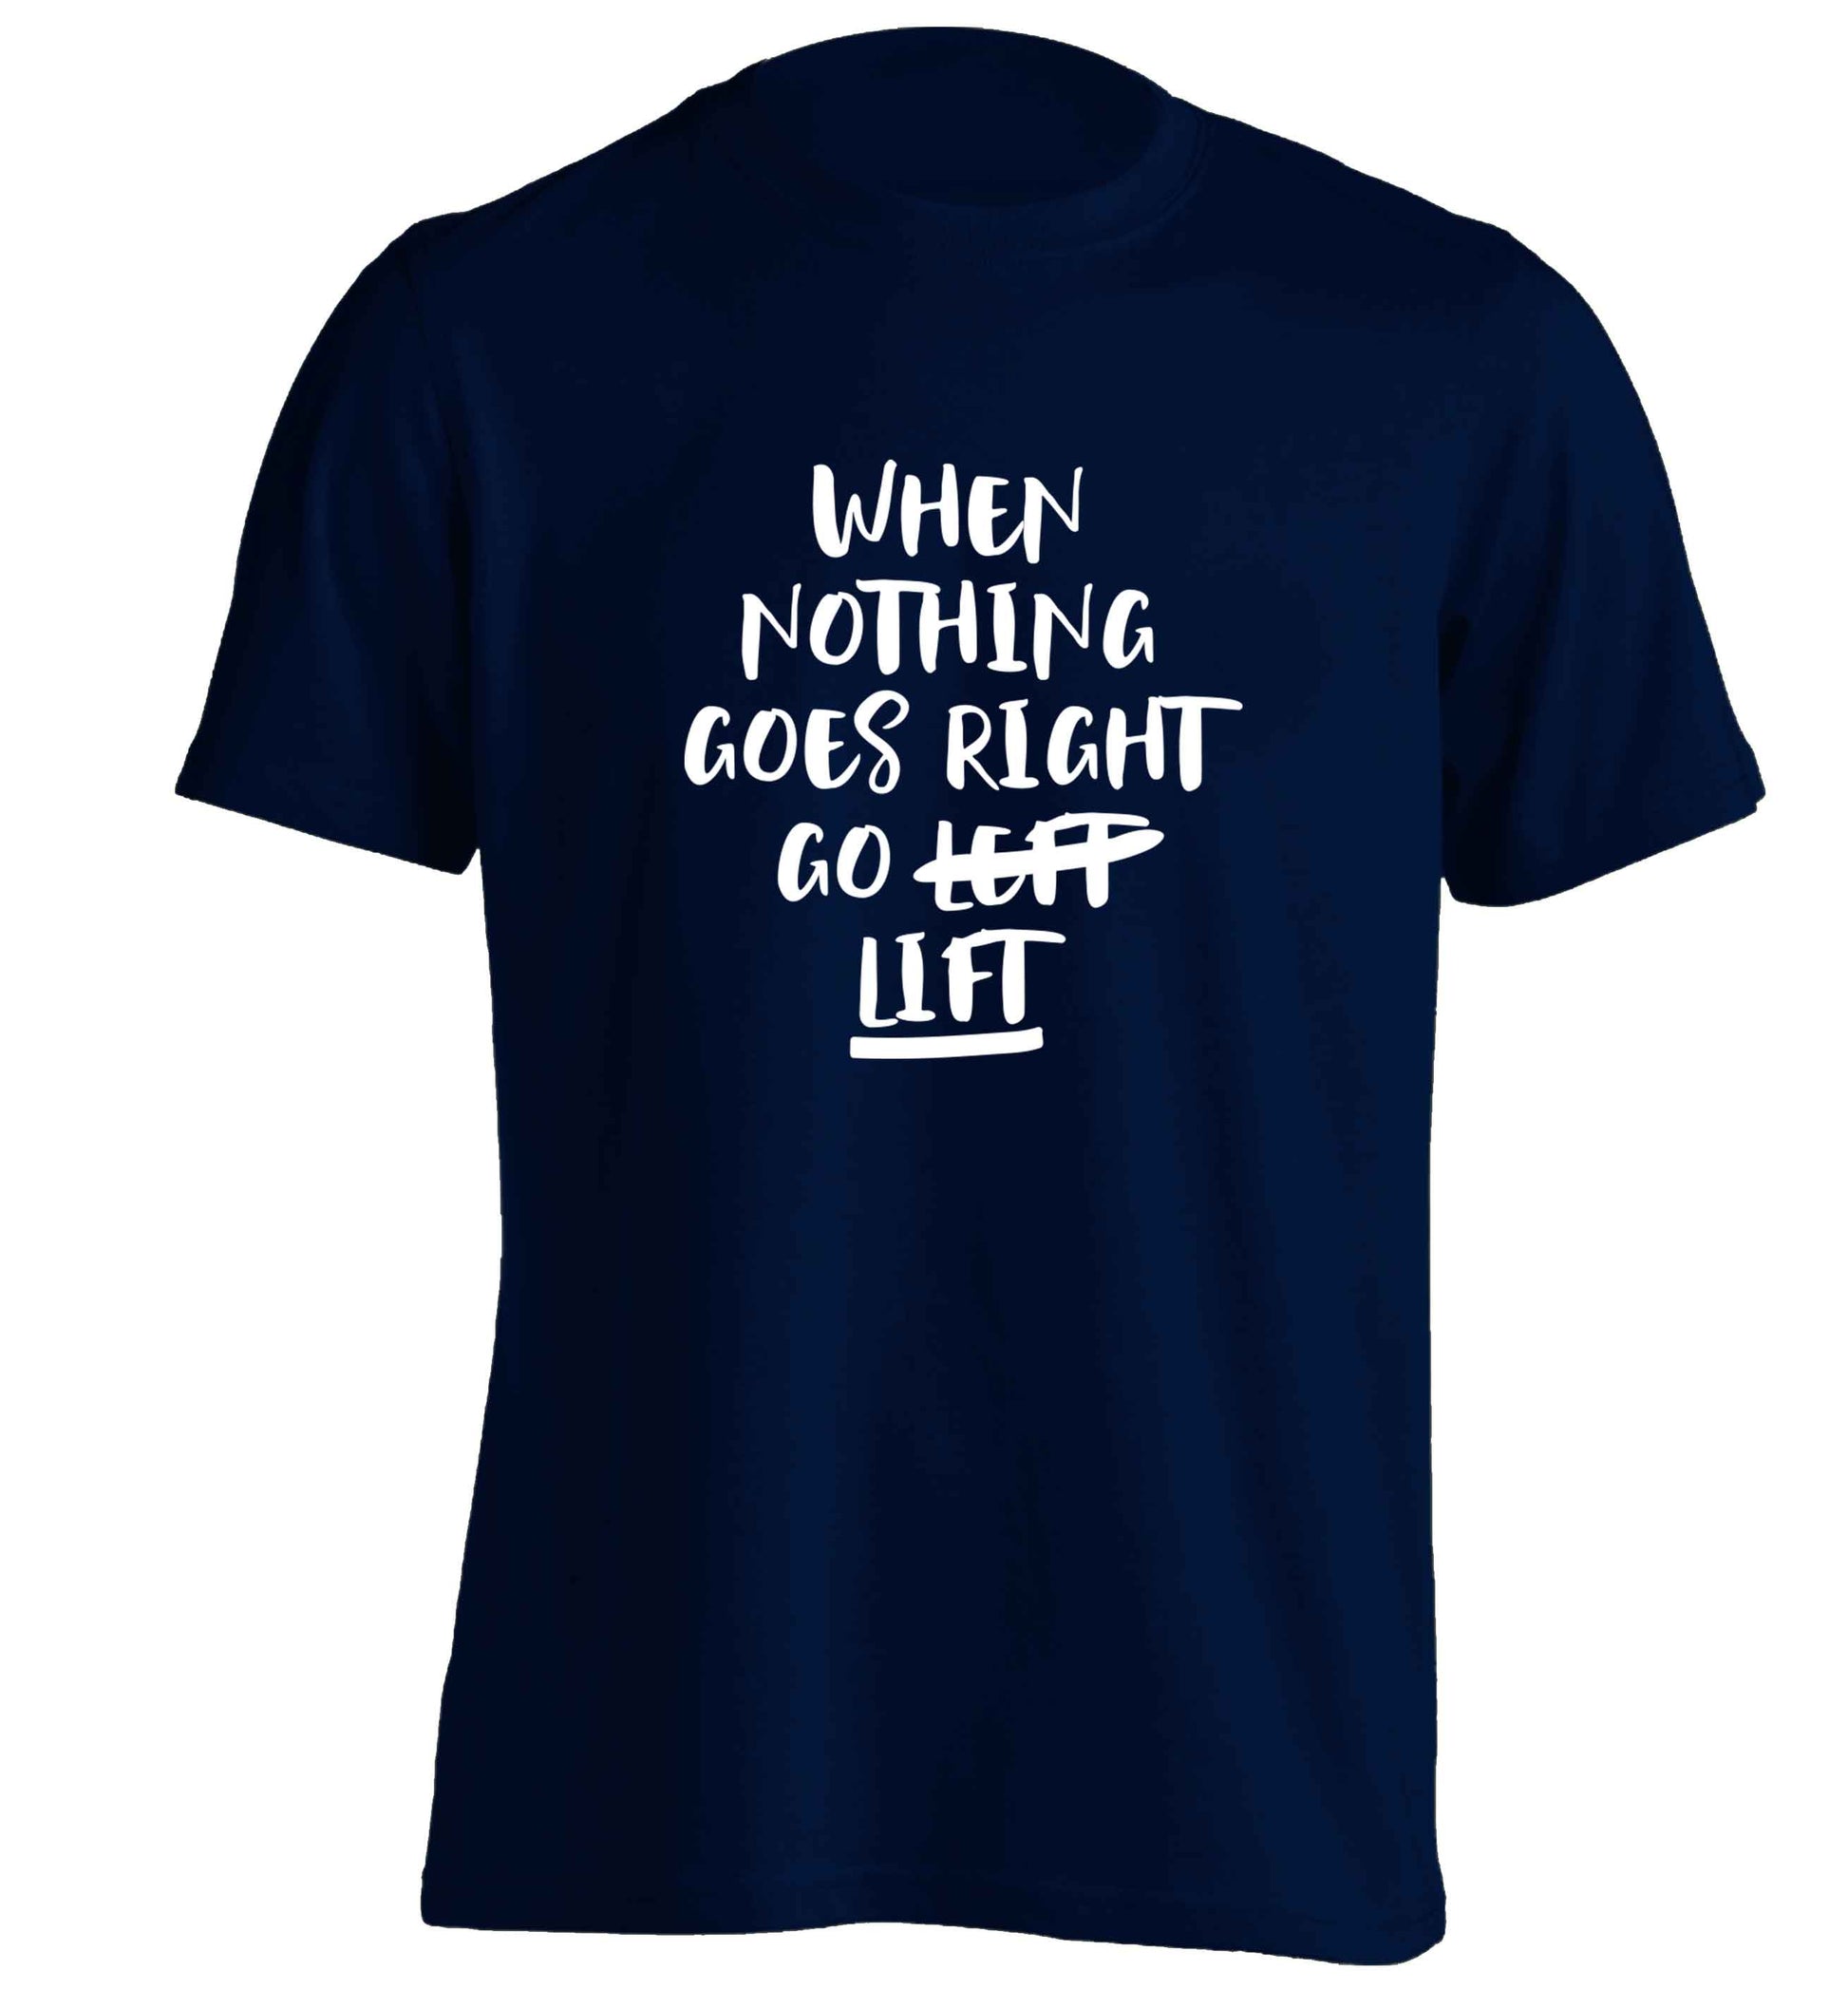 When nothing goes right go lift adults unisex navy Tshirt 2XL